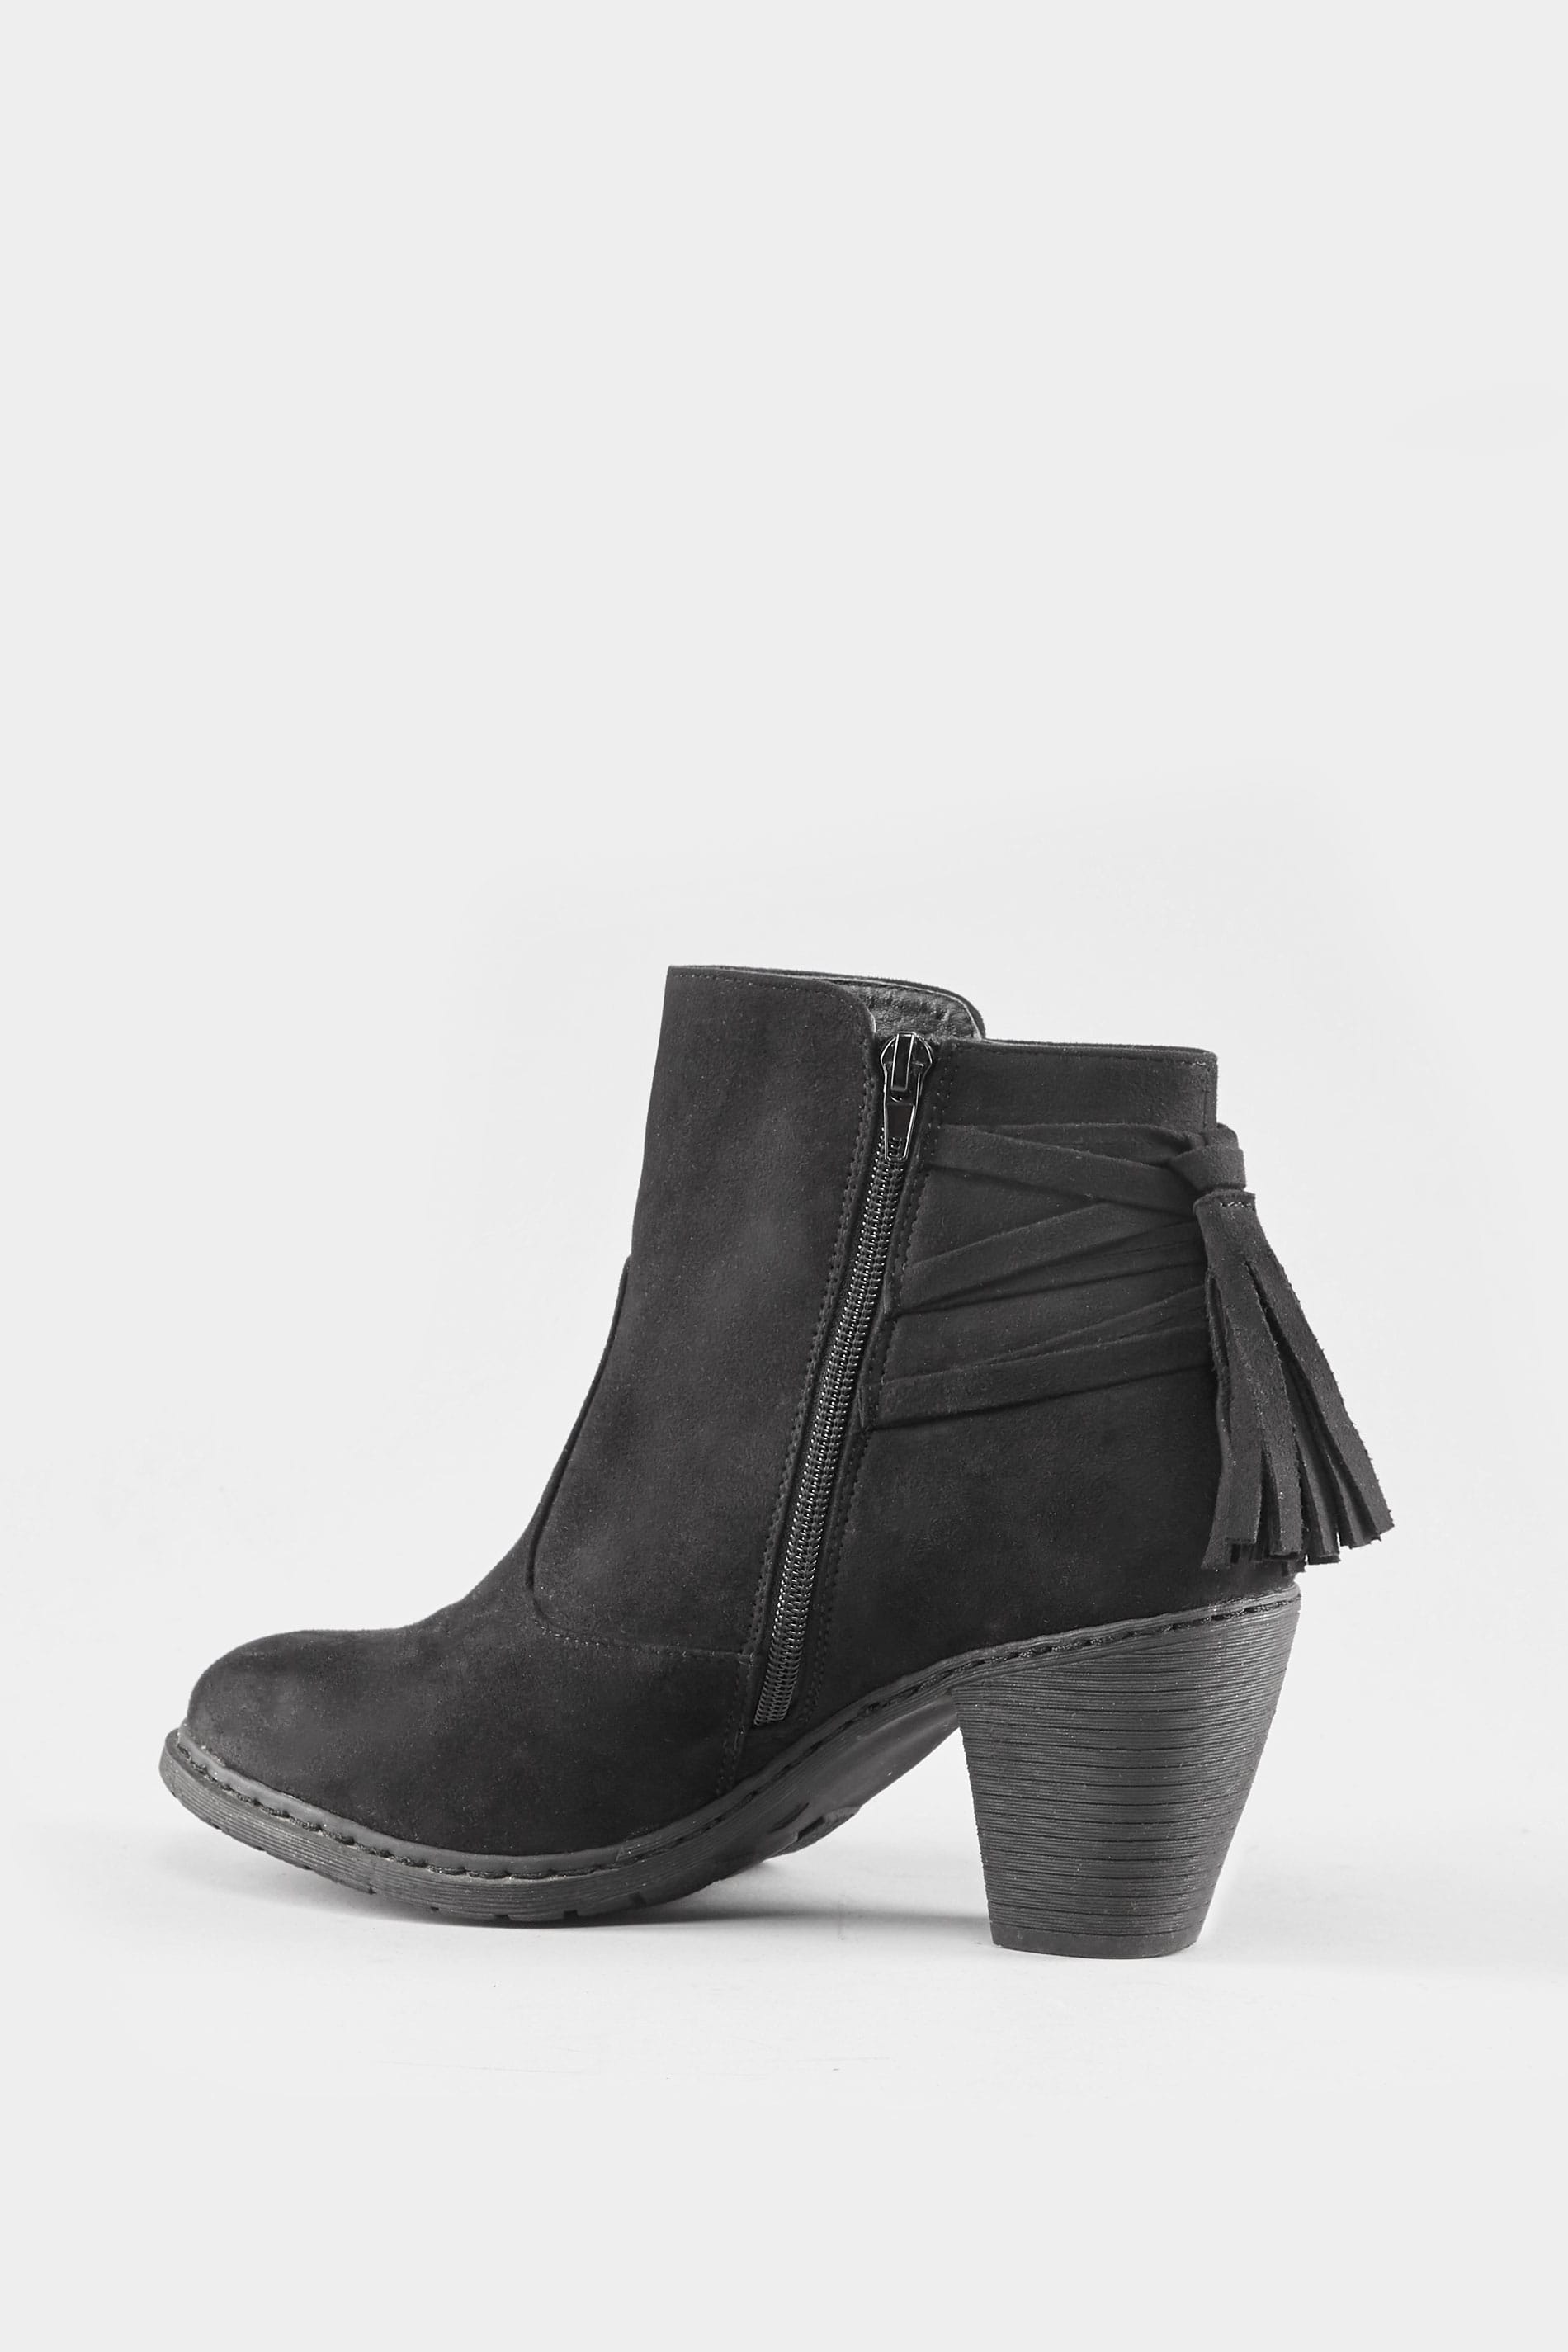 Black Tassel Heeled Ankle Boots In Extra Wide Fit | Yours Clothing